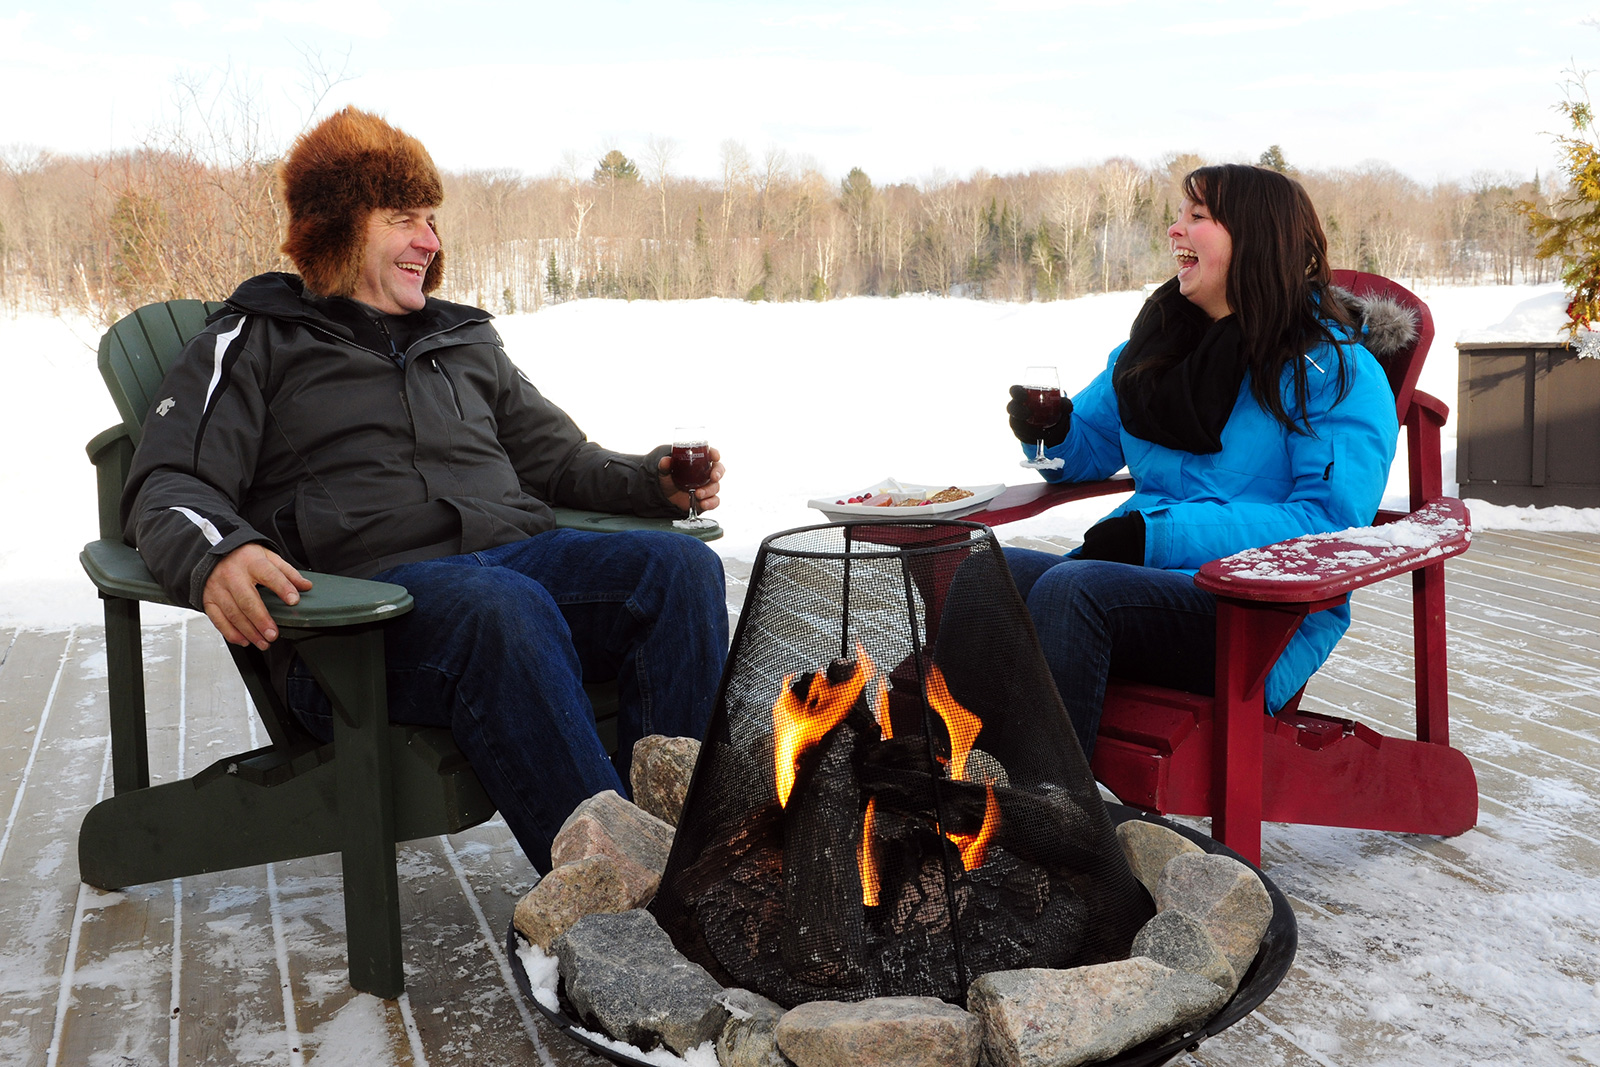 couple laughing and enjoying wine on an outdoor patio in front of a fire in winter time